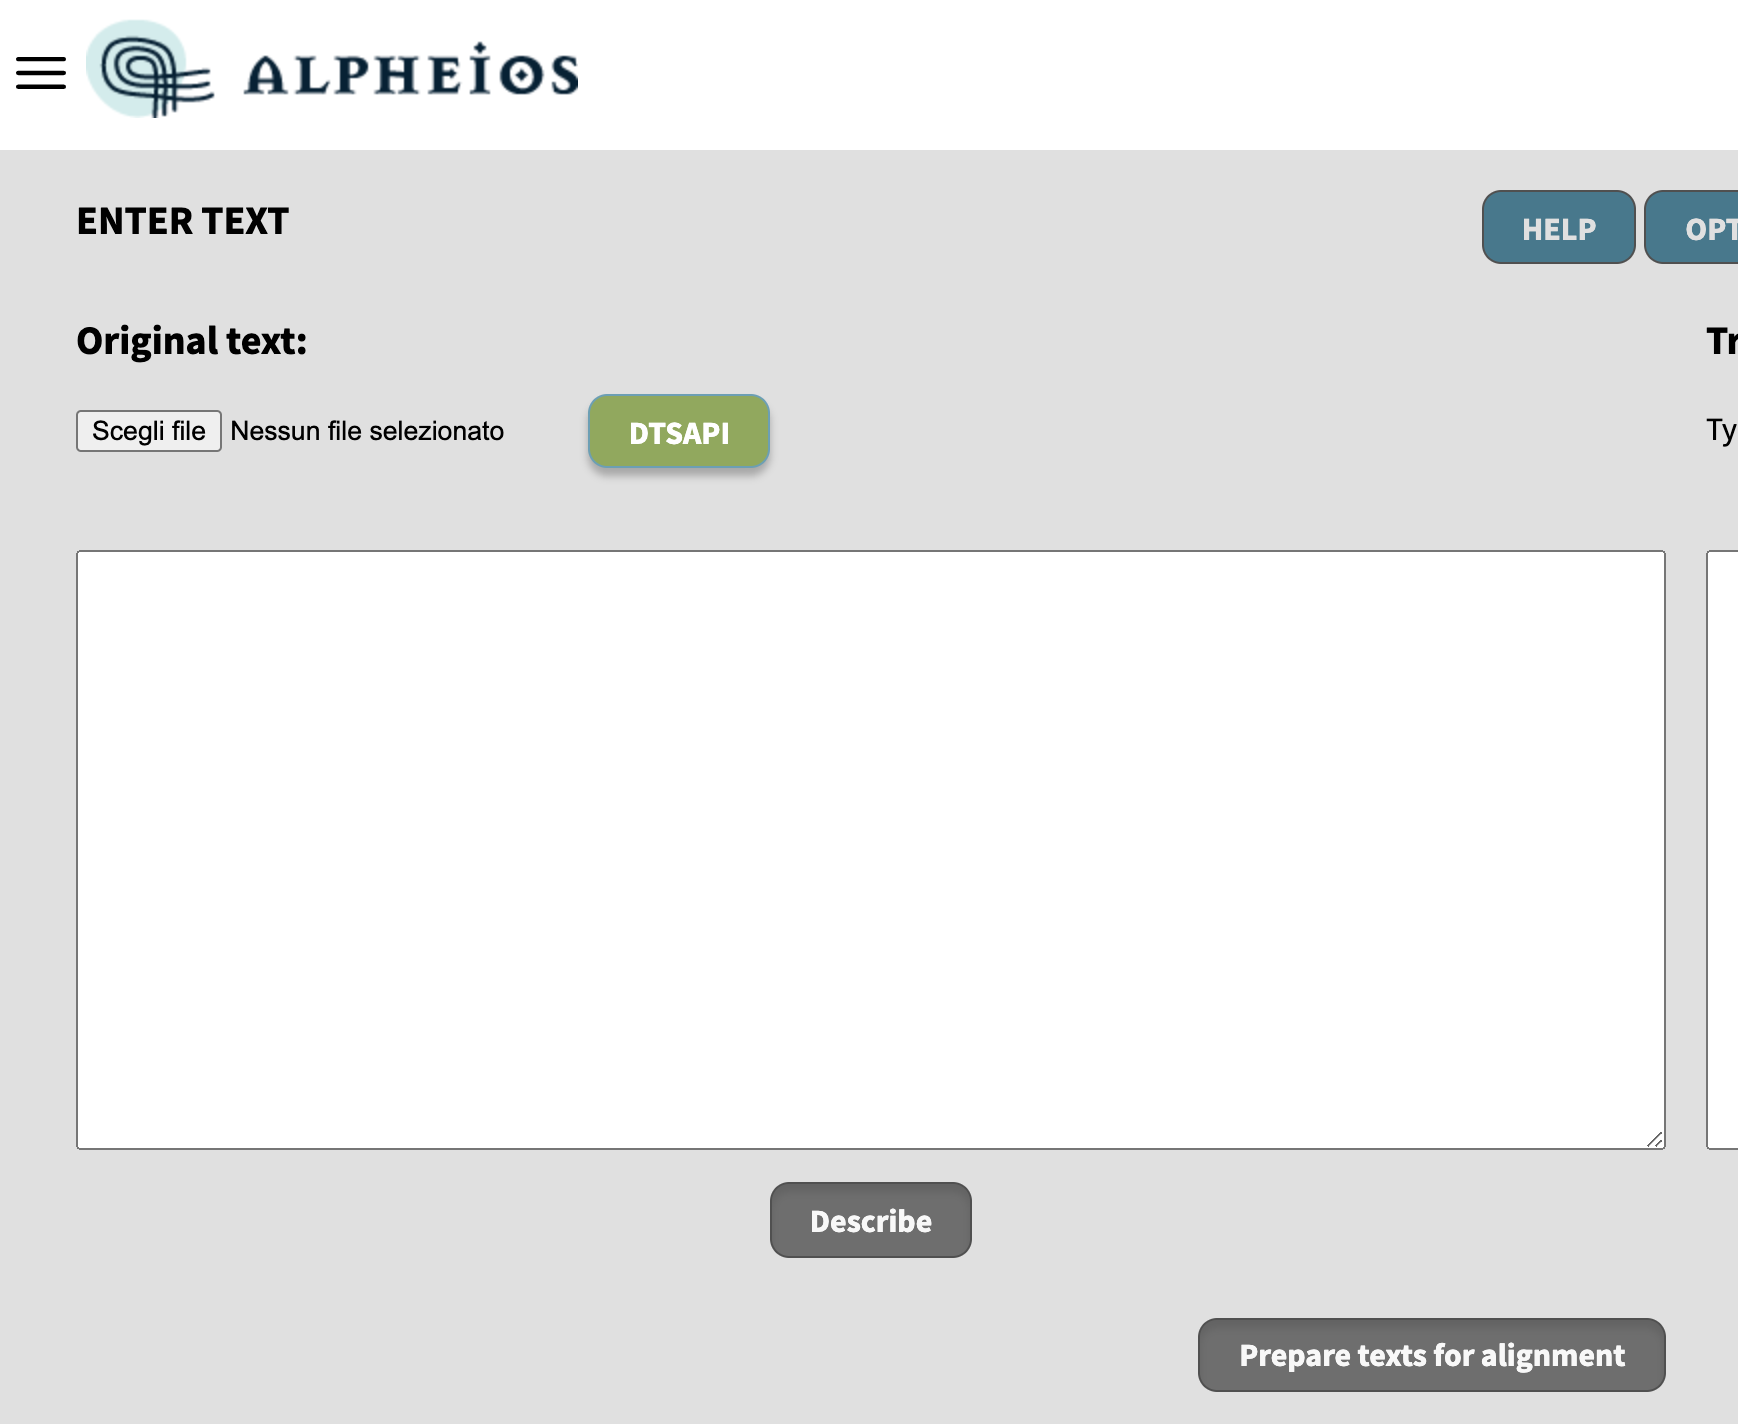 Loading a text in Alpheios from a DTS API.